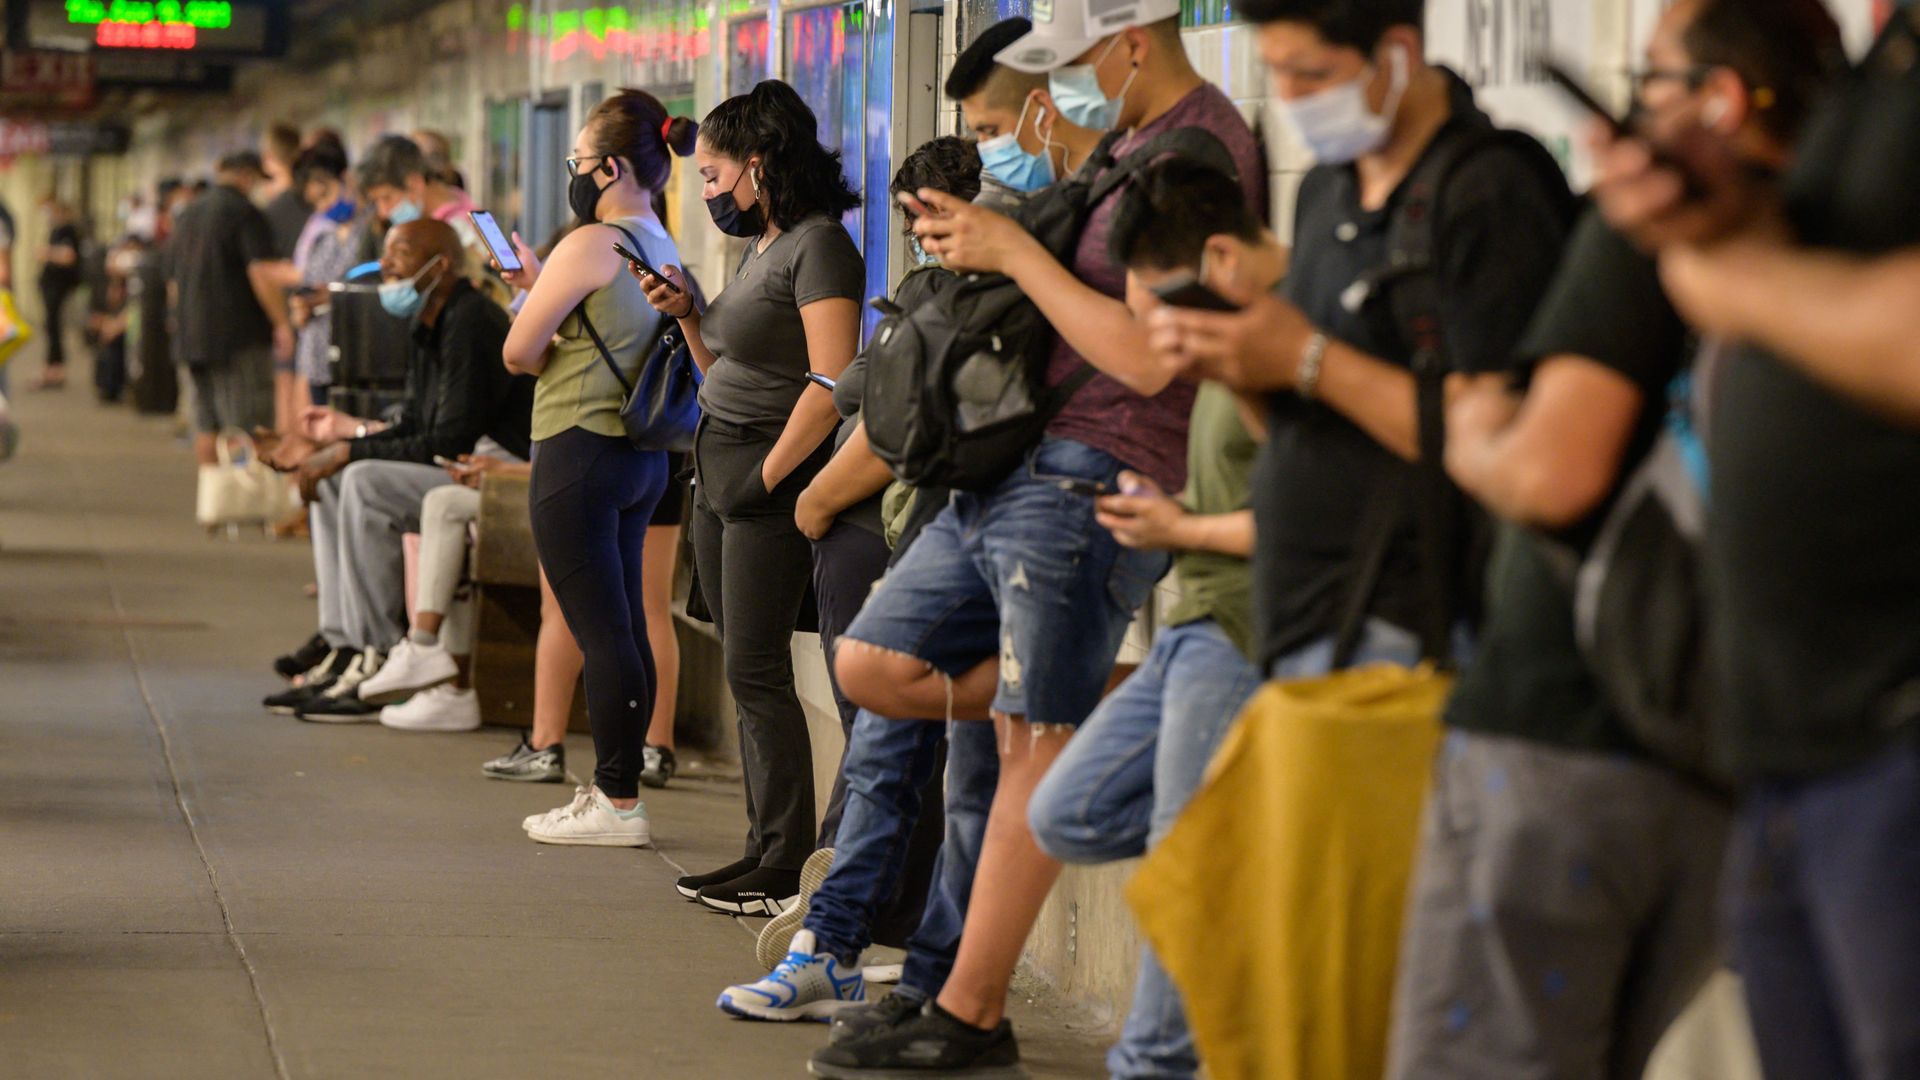 Commuters looks at their mobile phones as they wait for a subway train in New York on June 10, 2021.